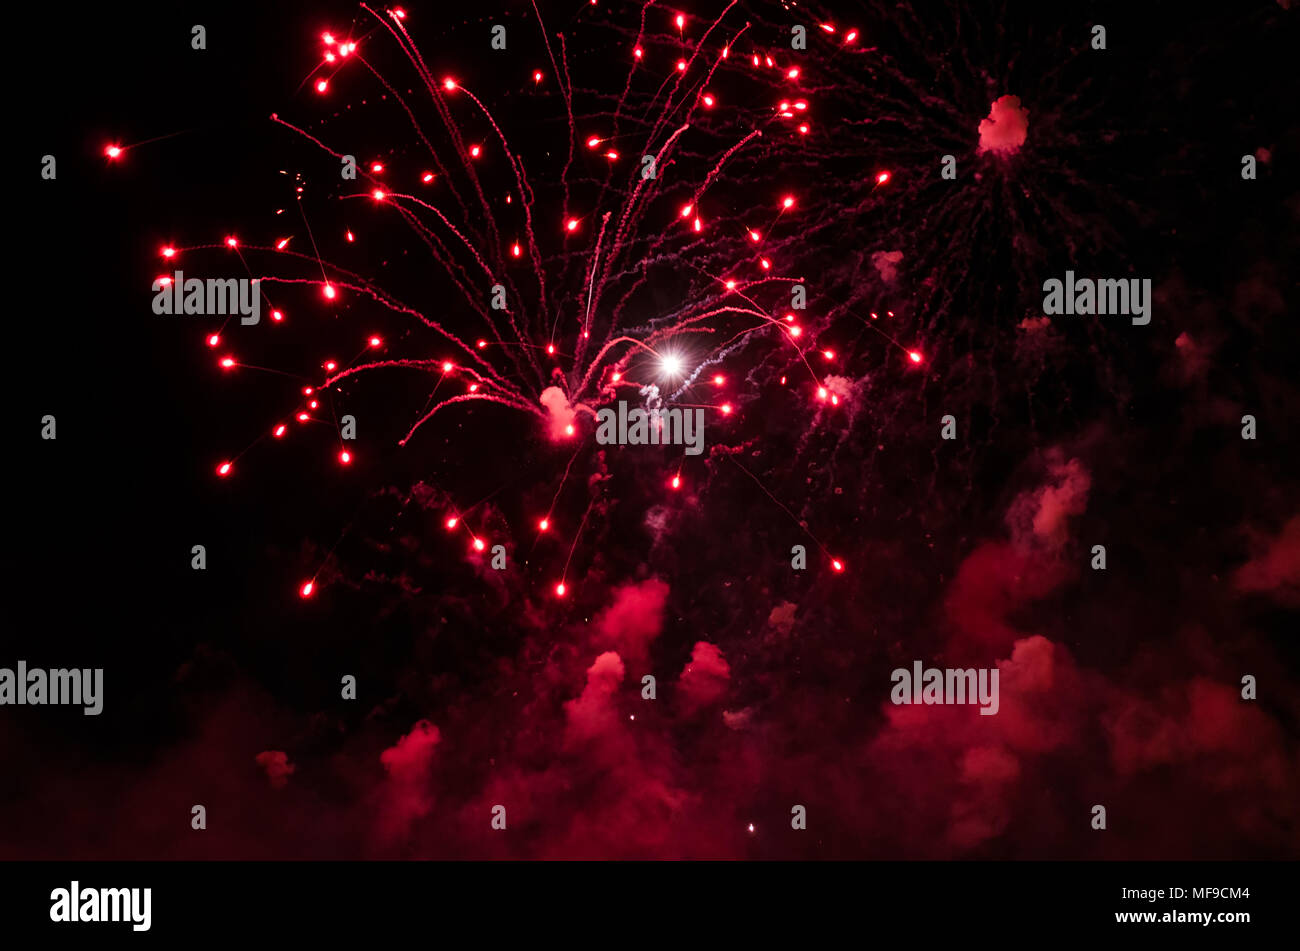 Fireworks with trails and smoke in red color against a black sky as background. Stock Photo